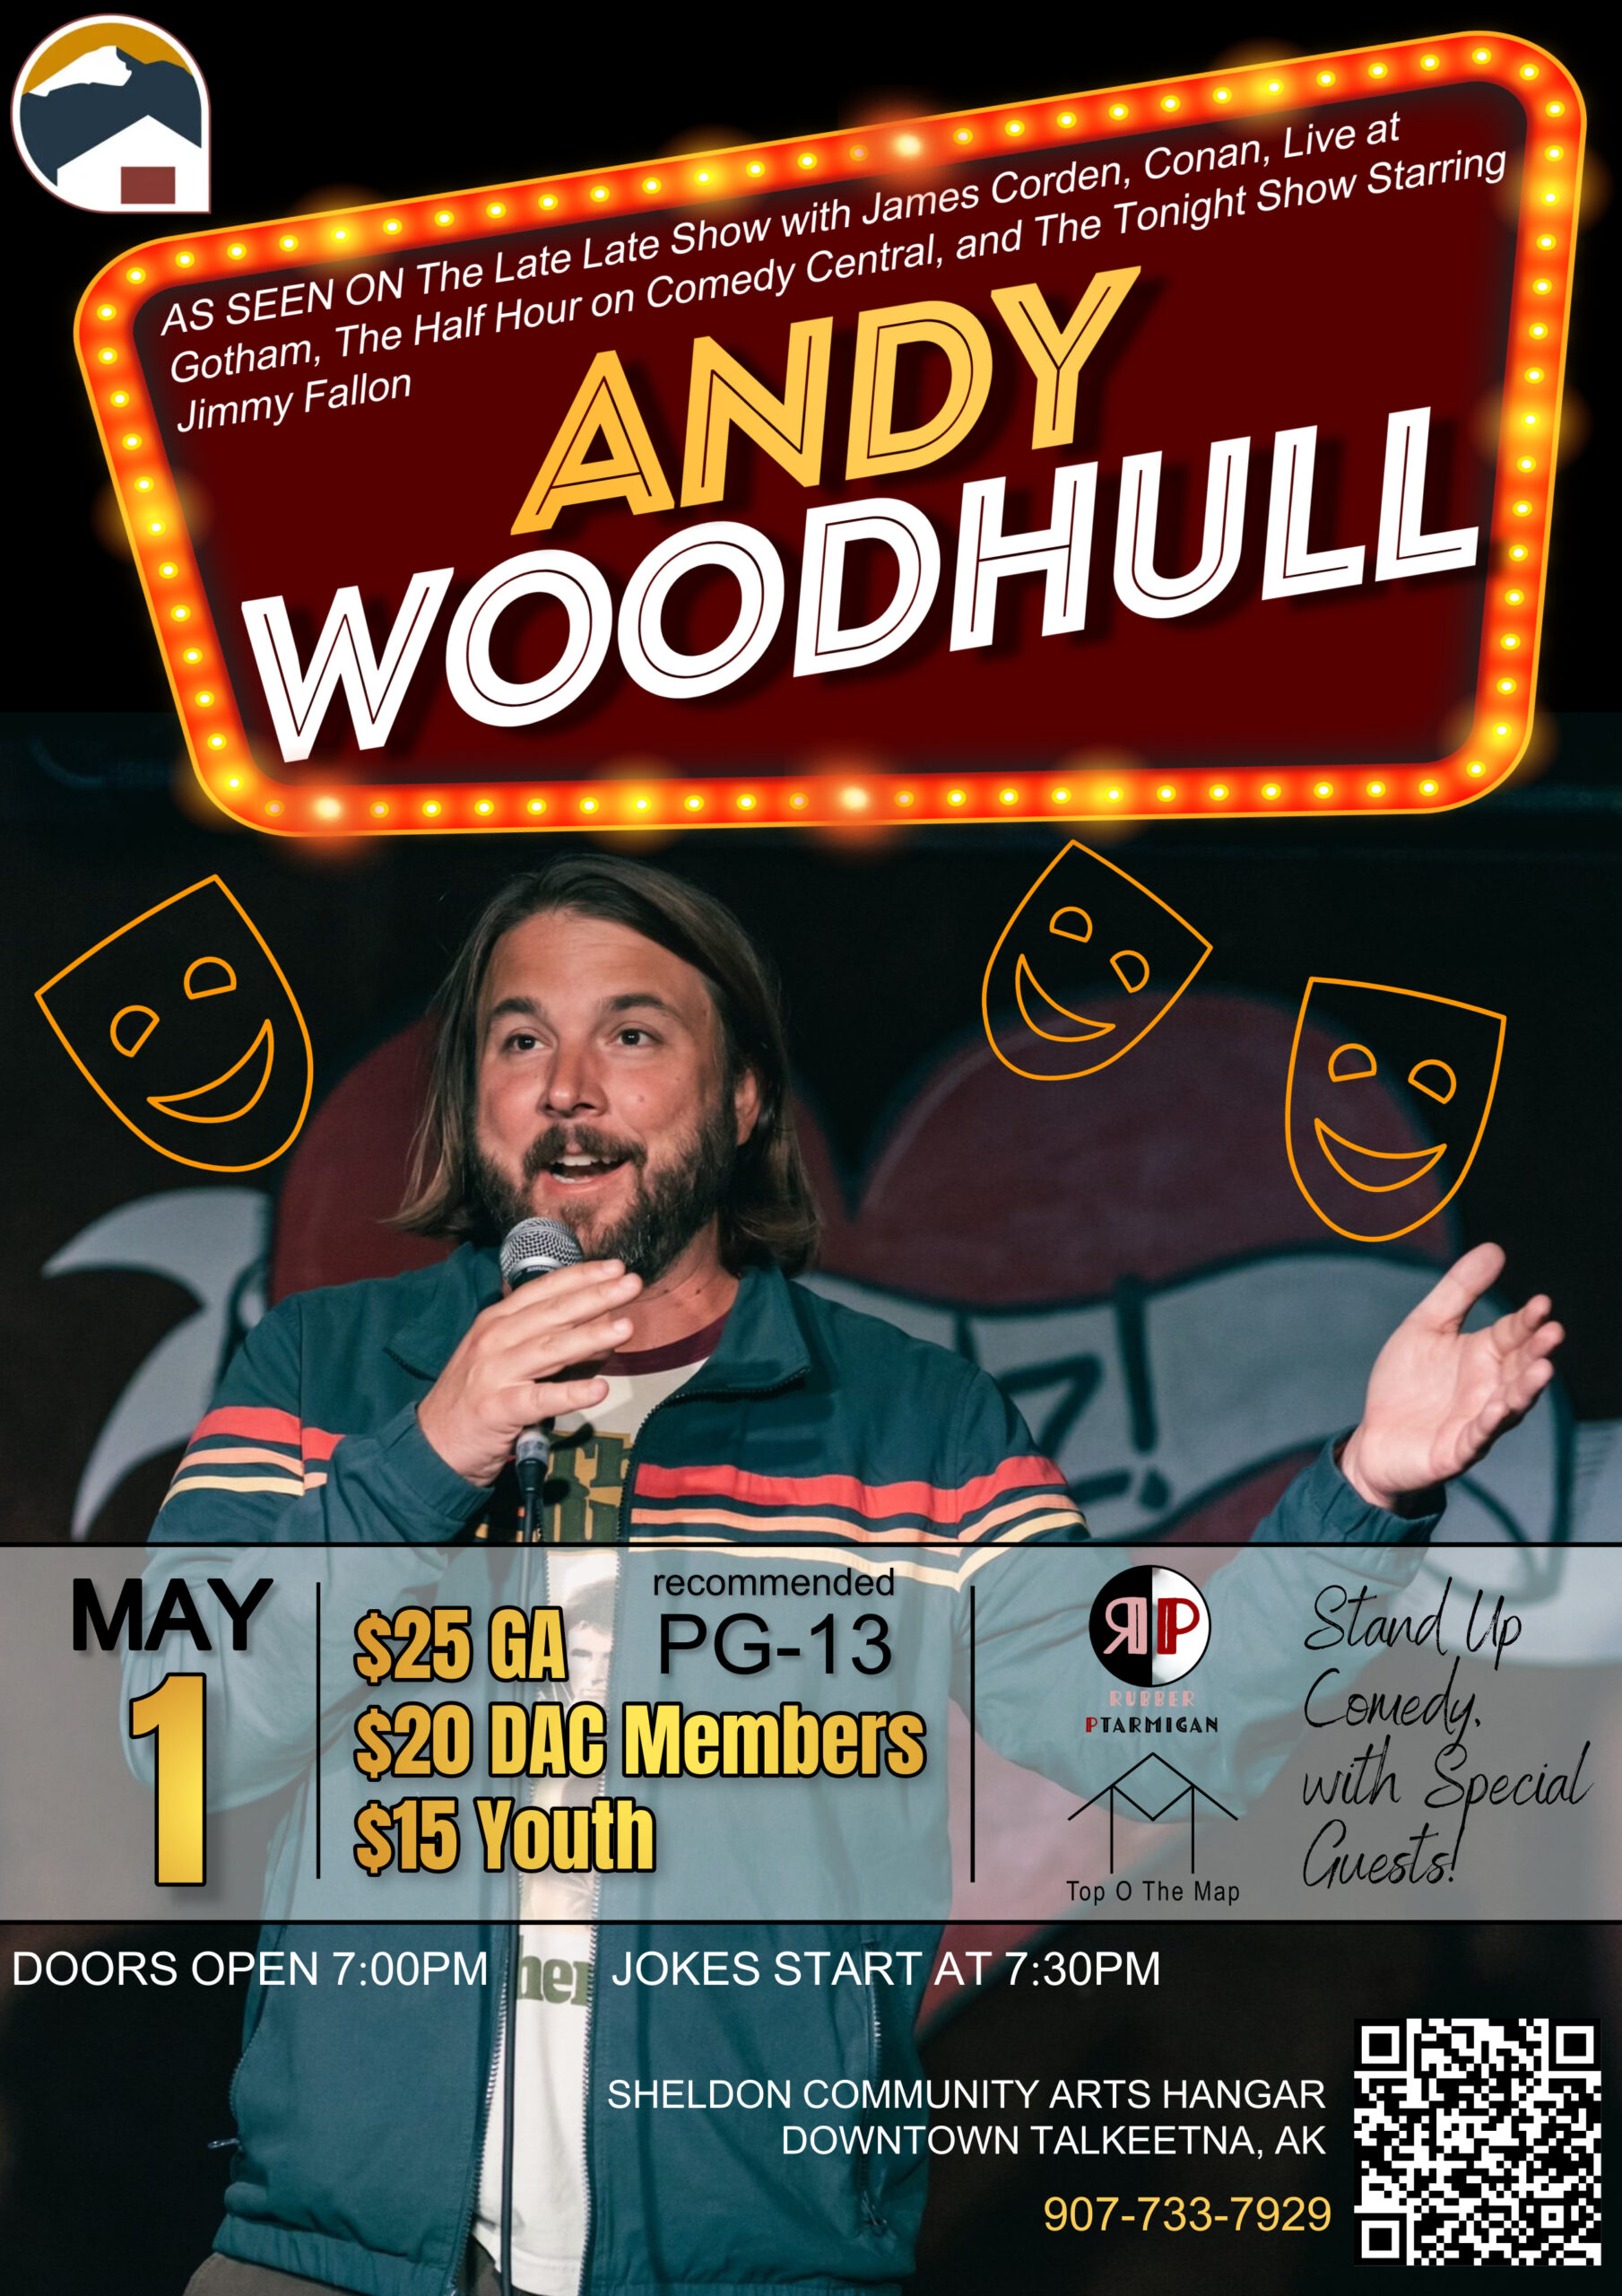 Andy Woodhull